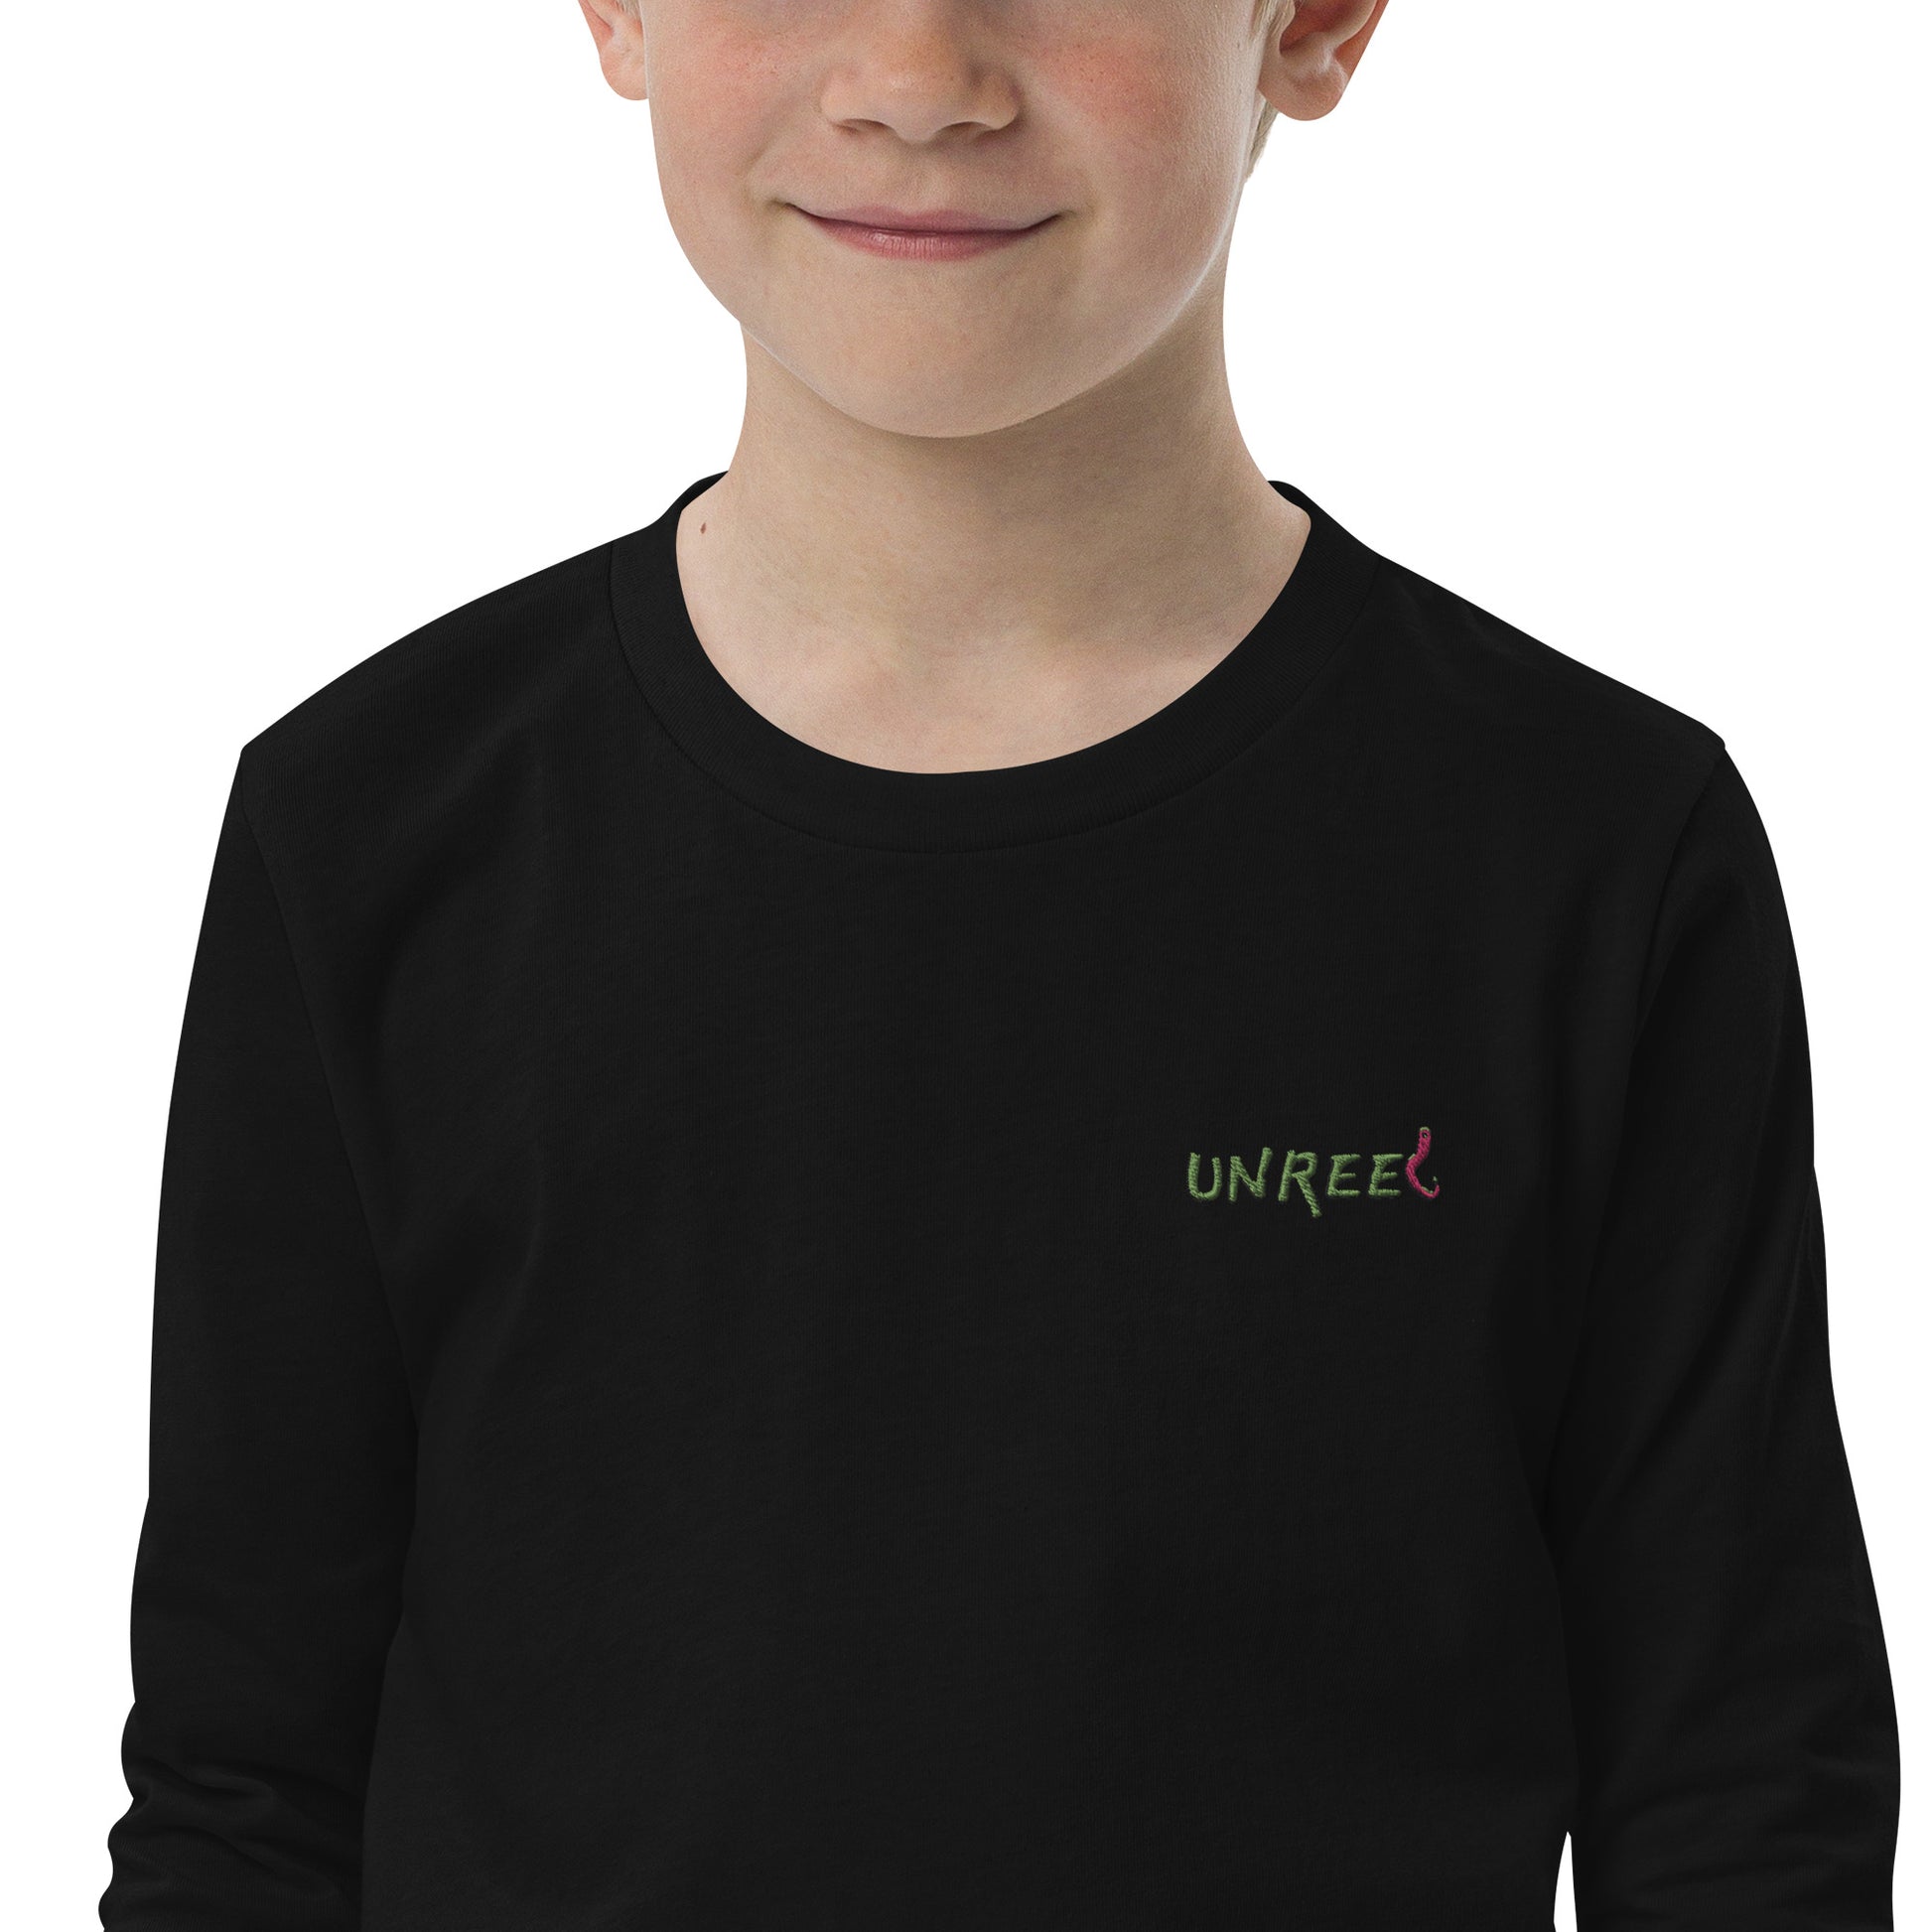 Unreel outdoors Youth long sleeve tee - Unreel Clothes for fishing and the outdoors.